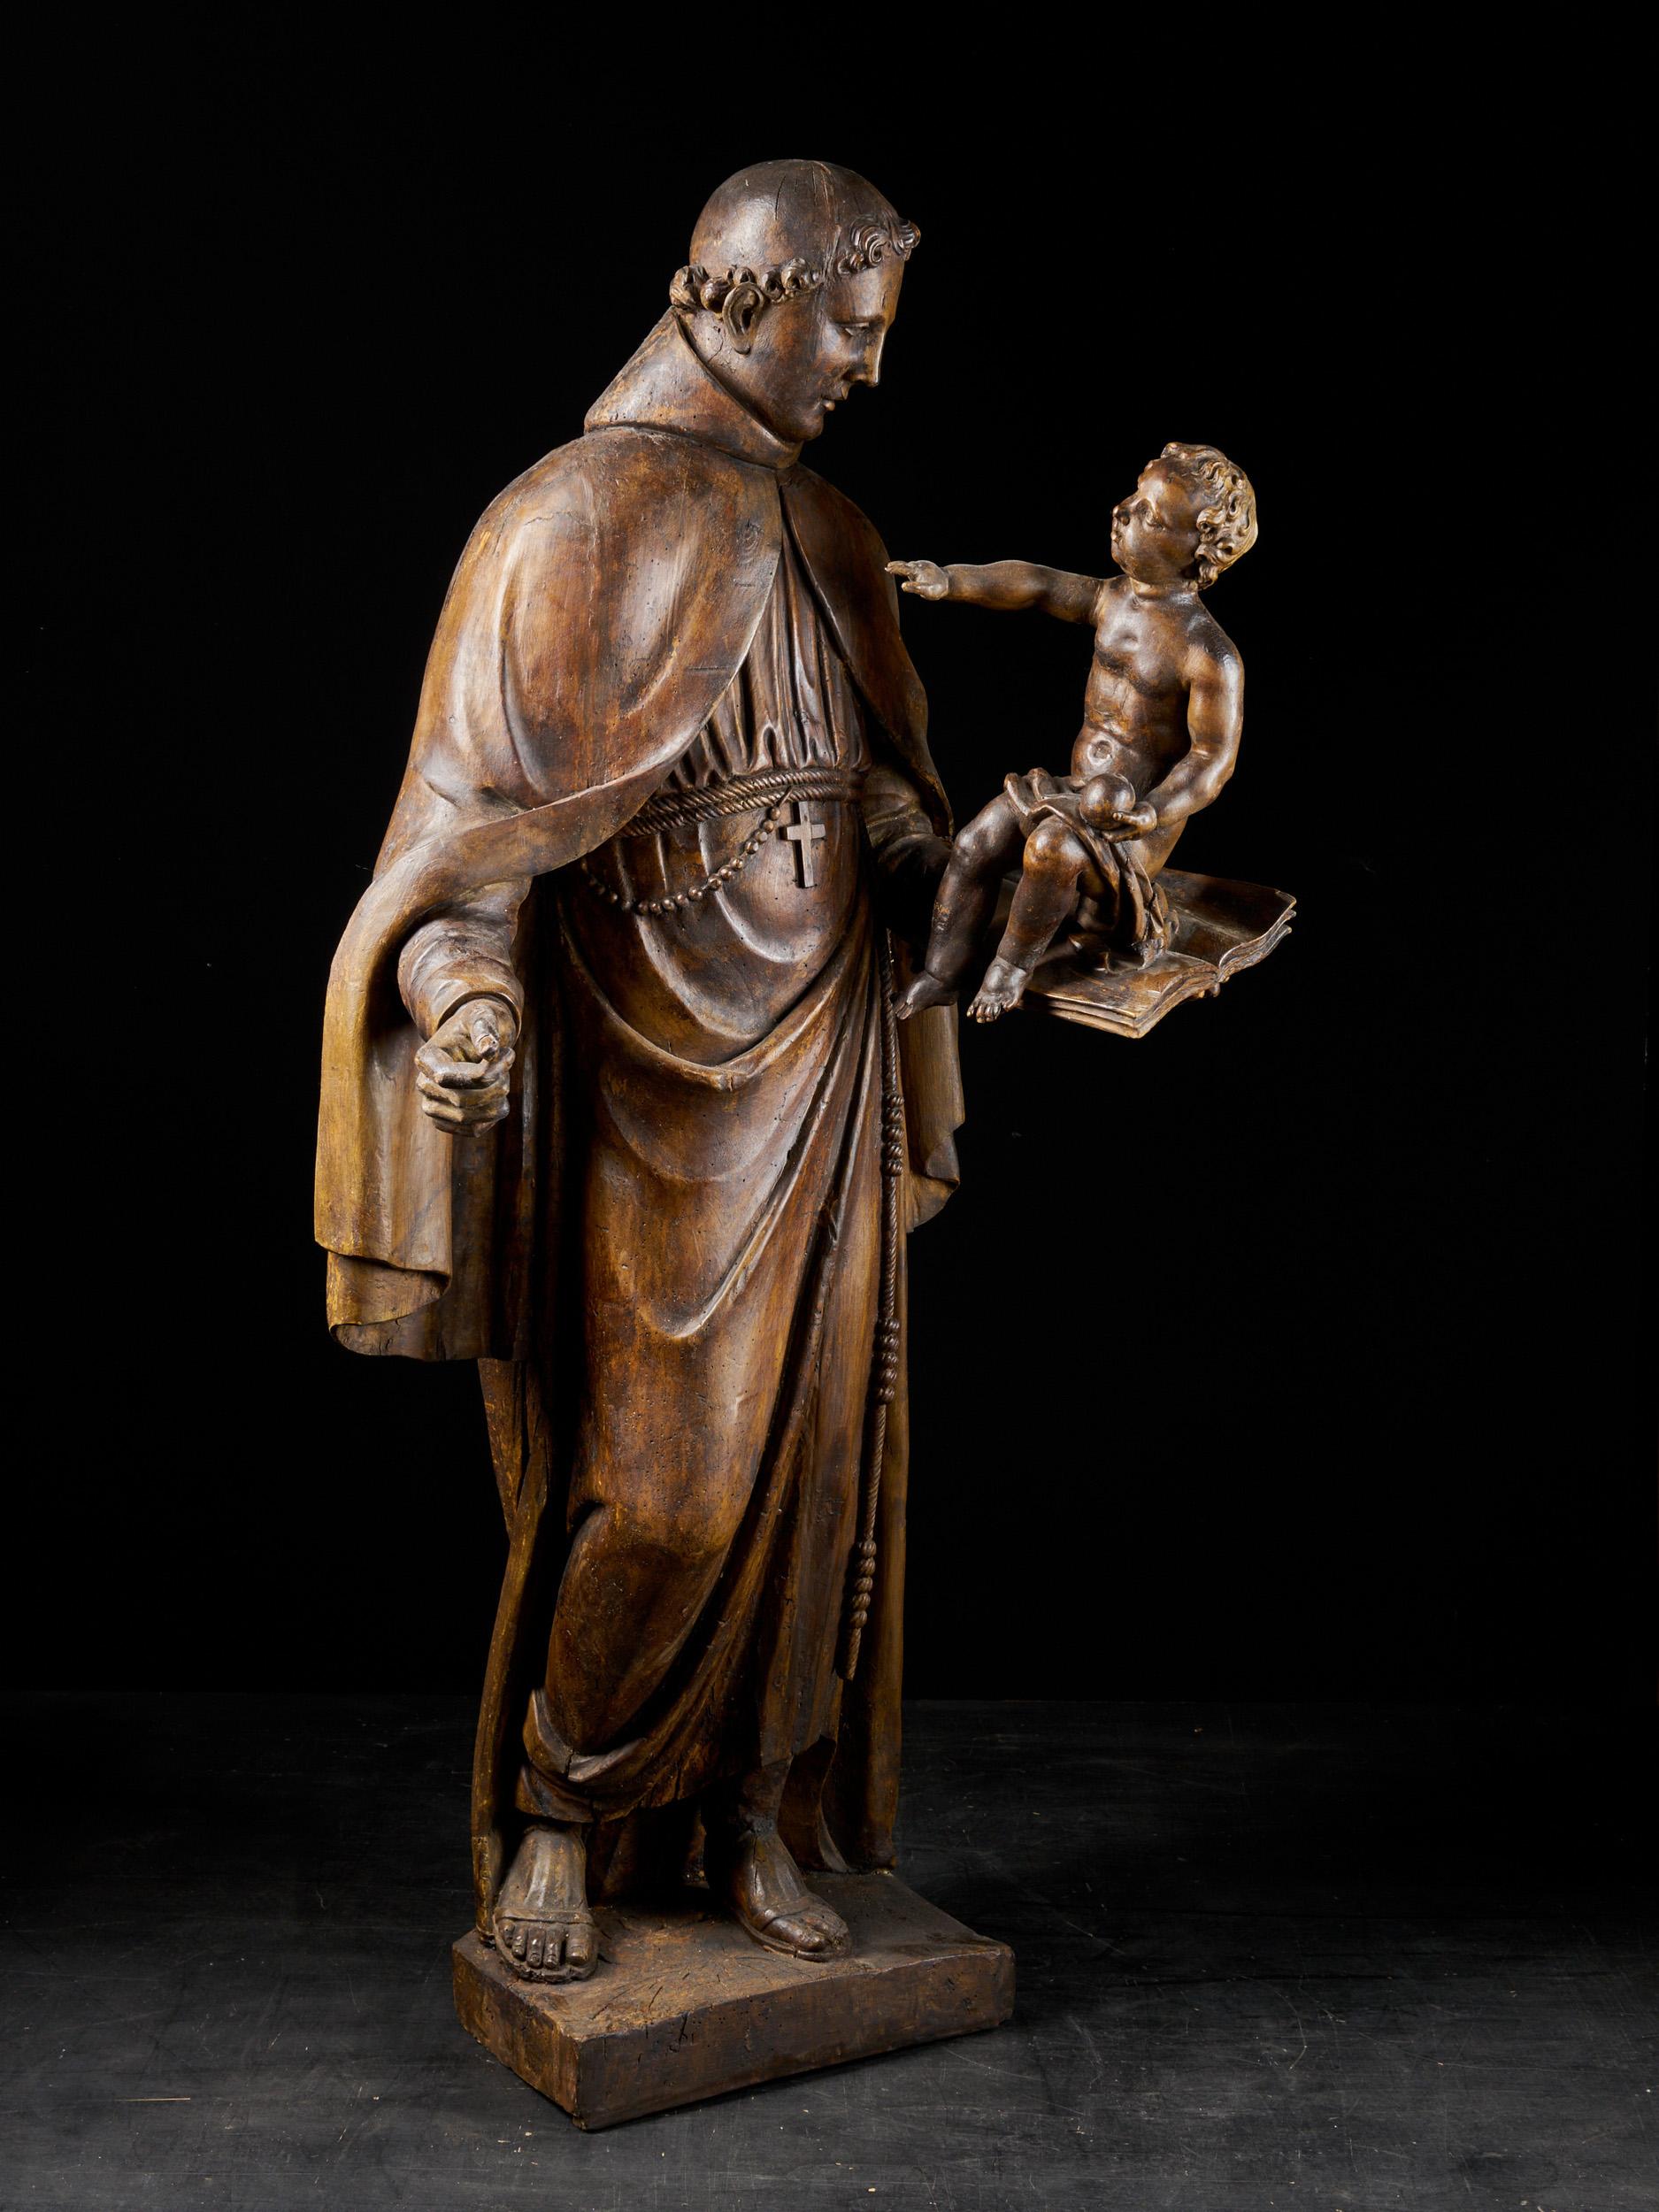 Late 17th C, Baroque, Saint, Italian School, Wooden Sculpture of Saint Anthony - Brown Figurative Sculpture by Unknown